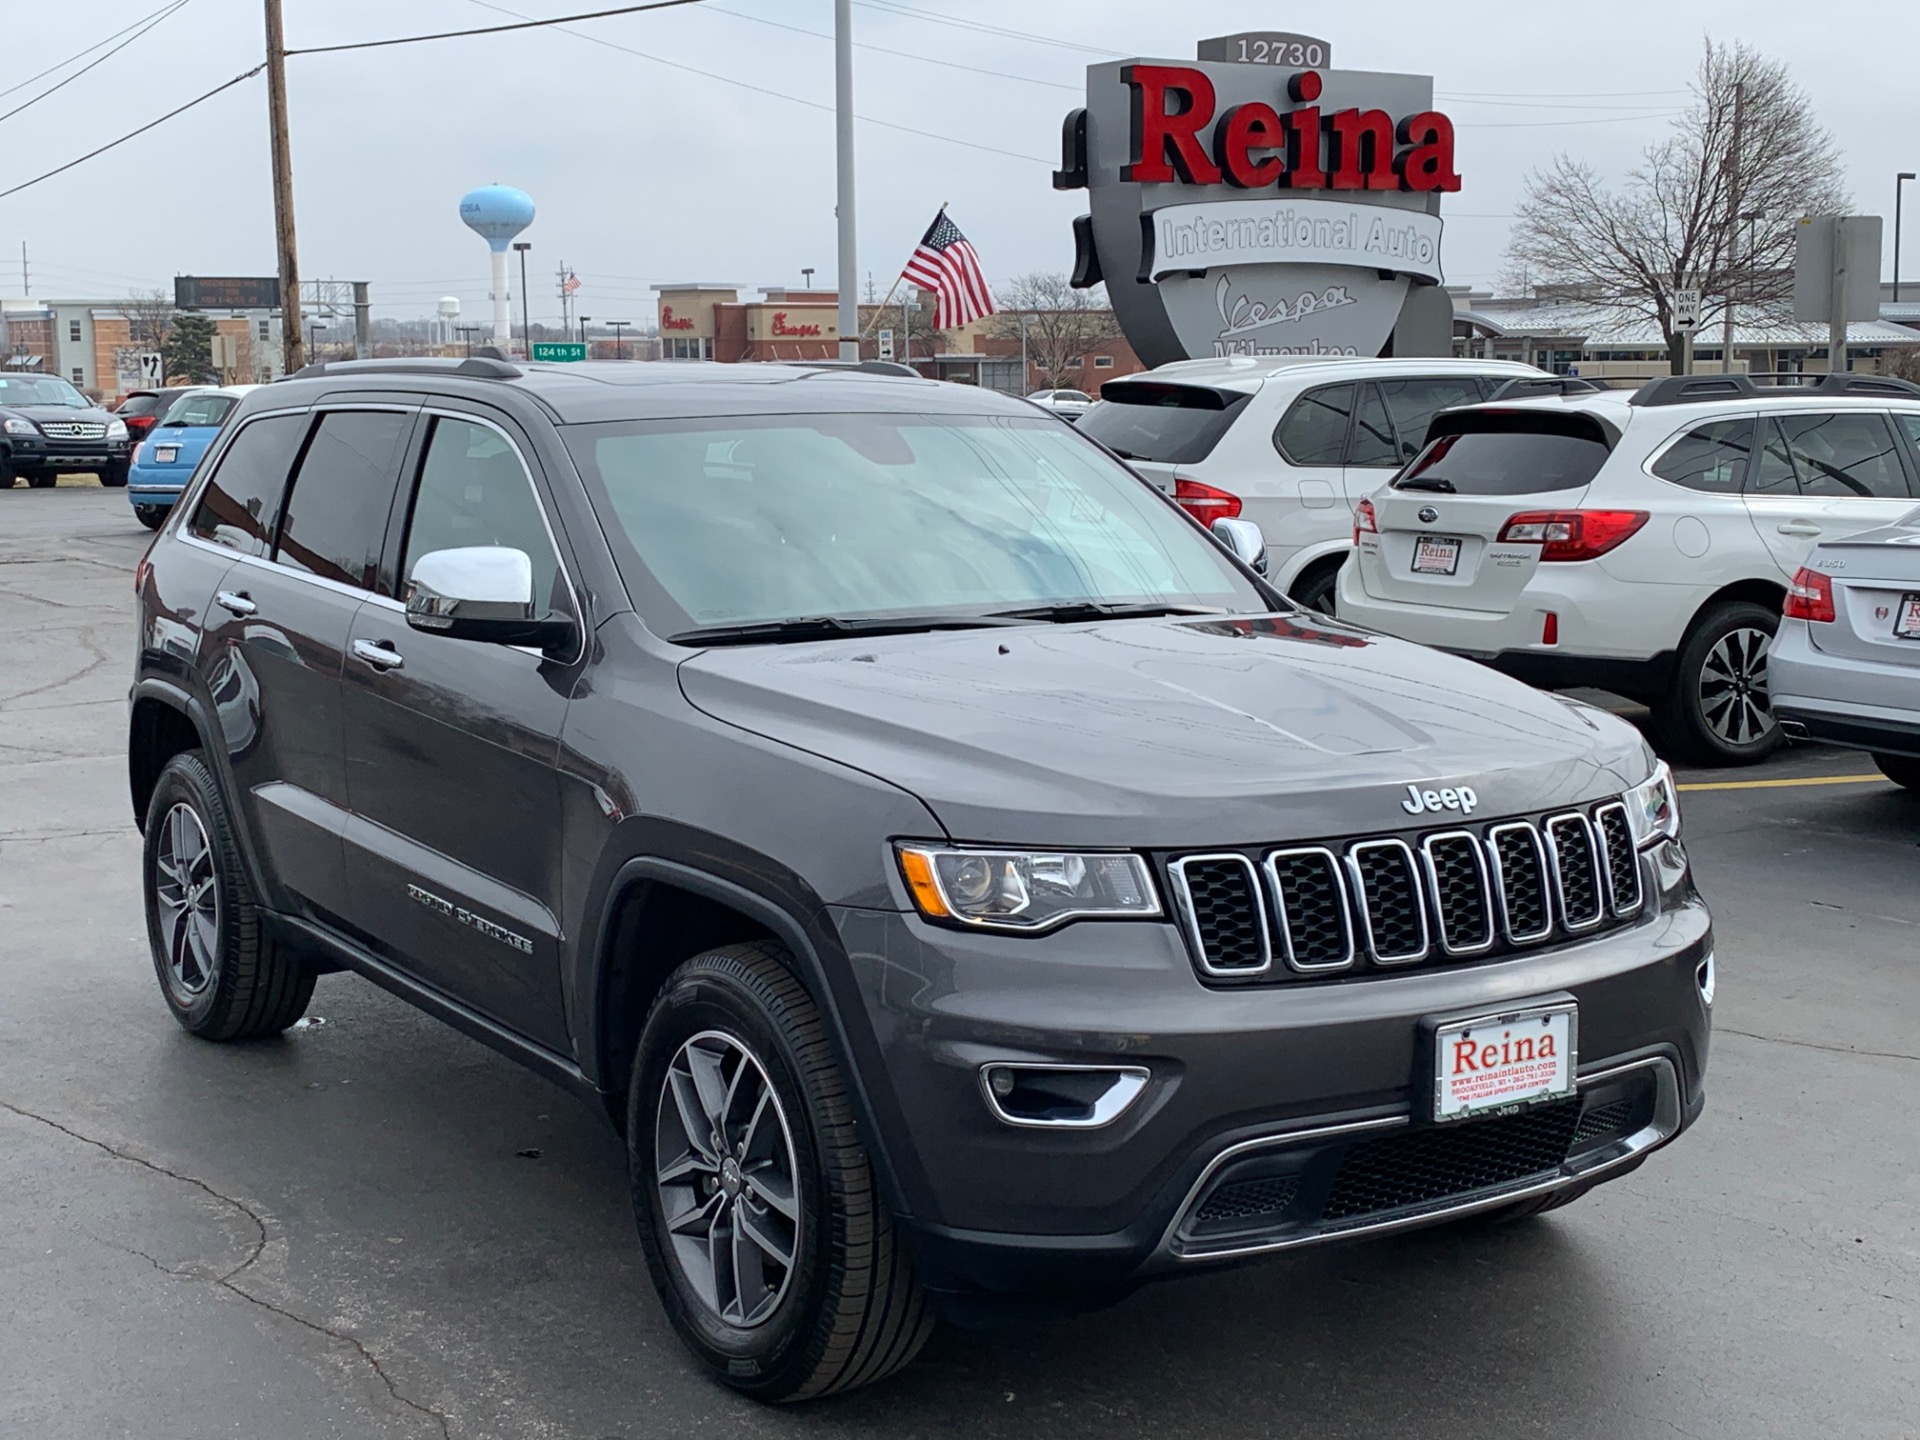 2018 Jeep Grand Cherokee Limited 4x4 Stock 7578 For Sale Near